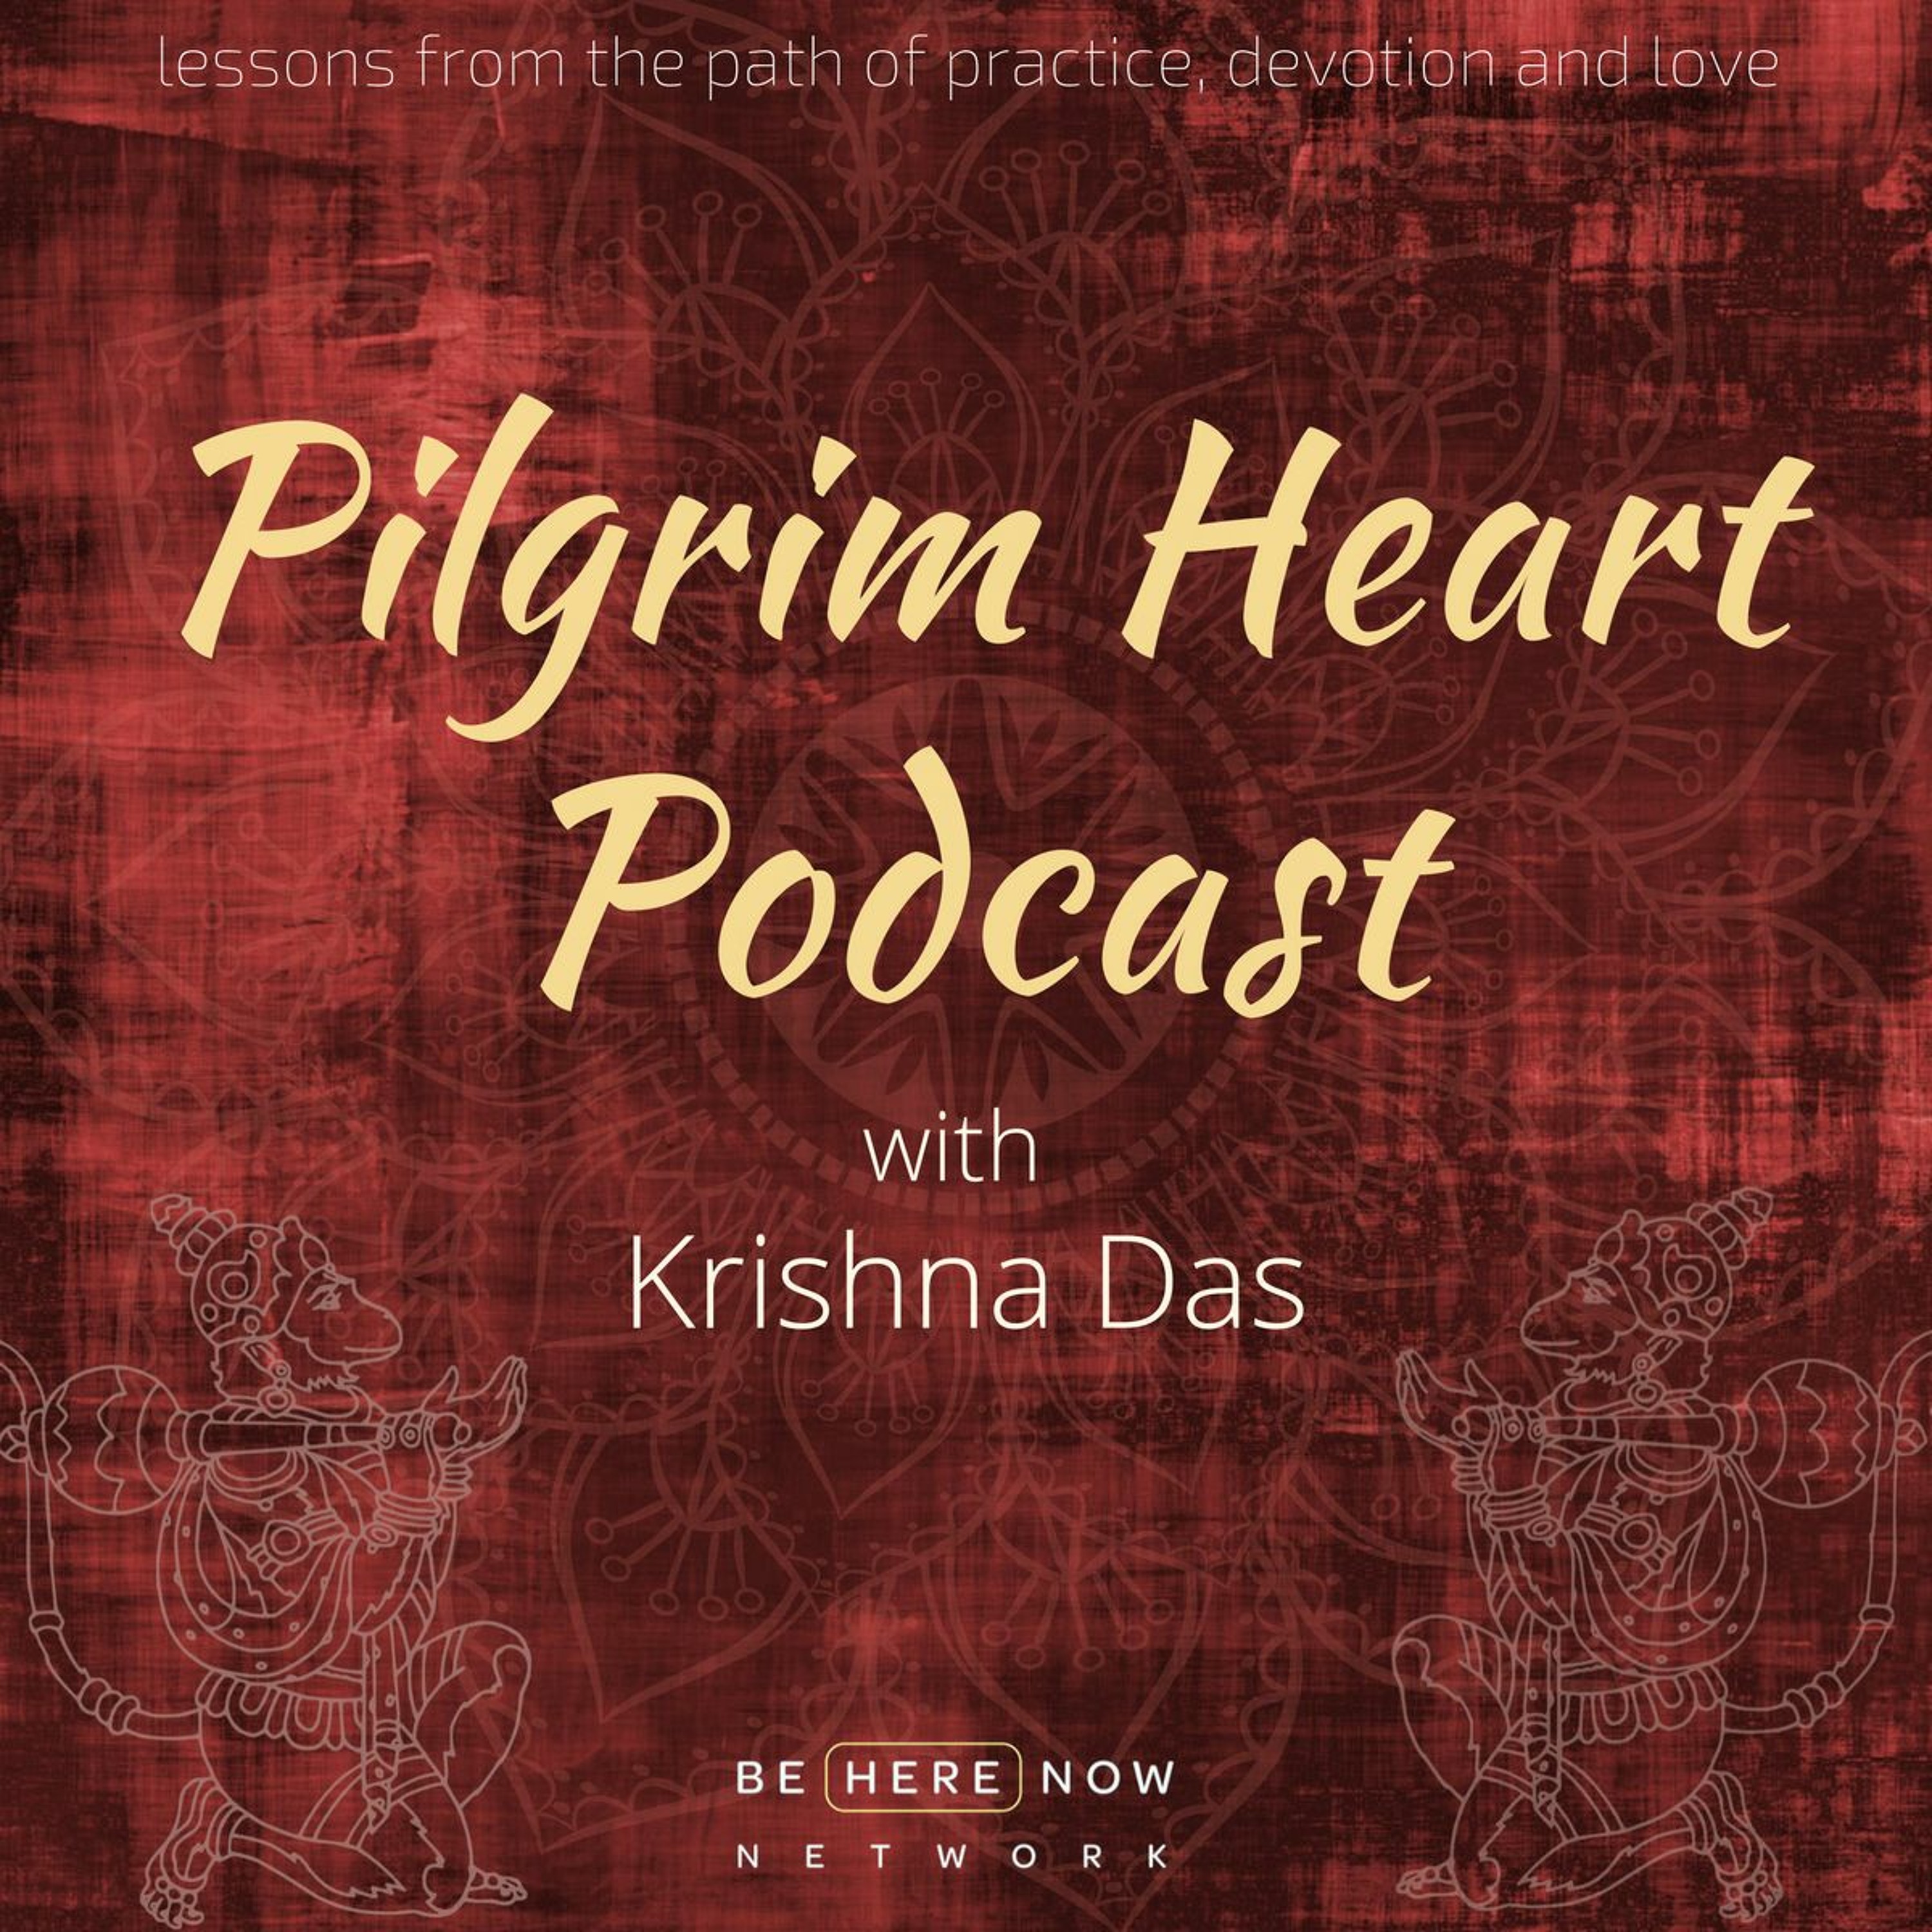 Krishna Das: All Paths Lead To The One – Pilgrim Heart Podcast Ep. 153